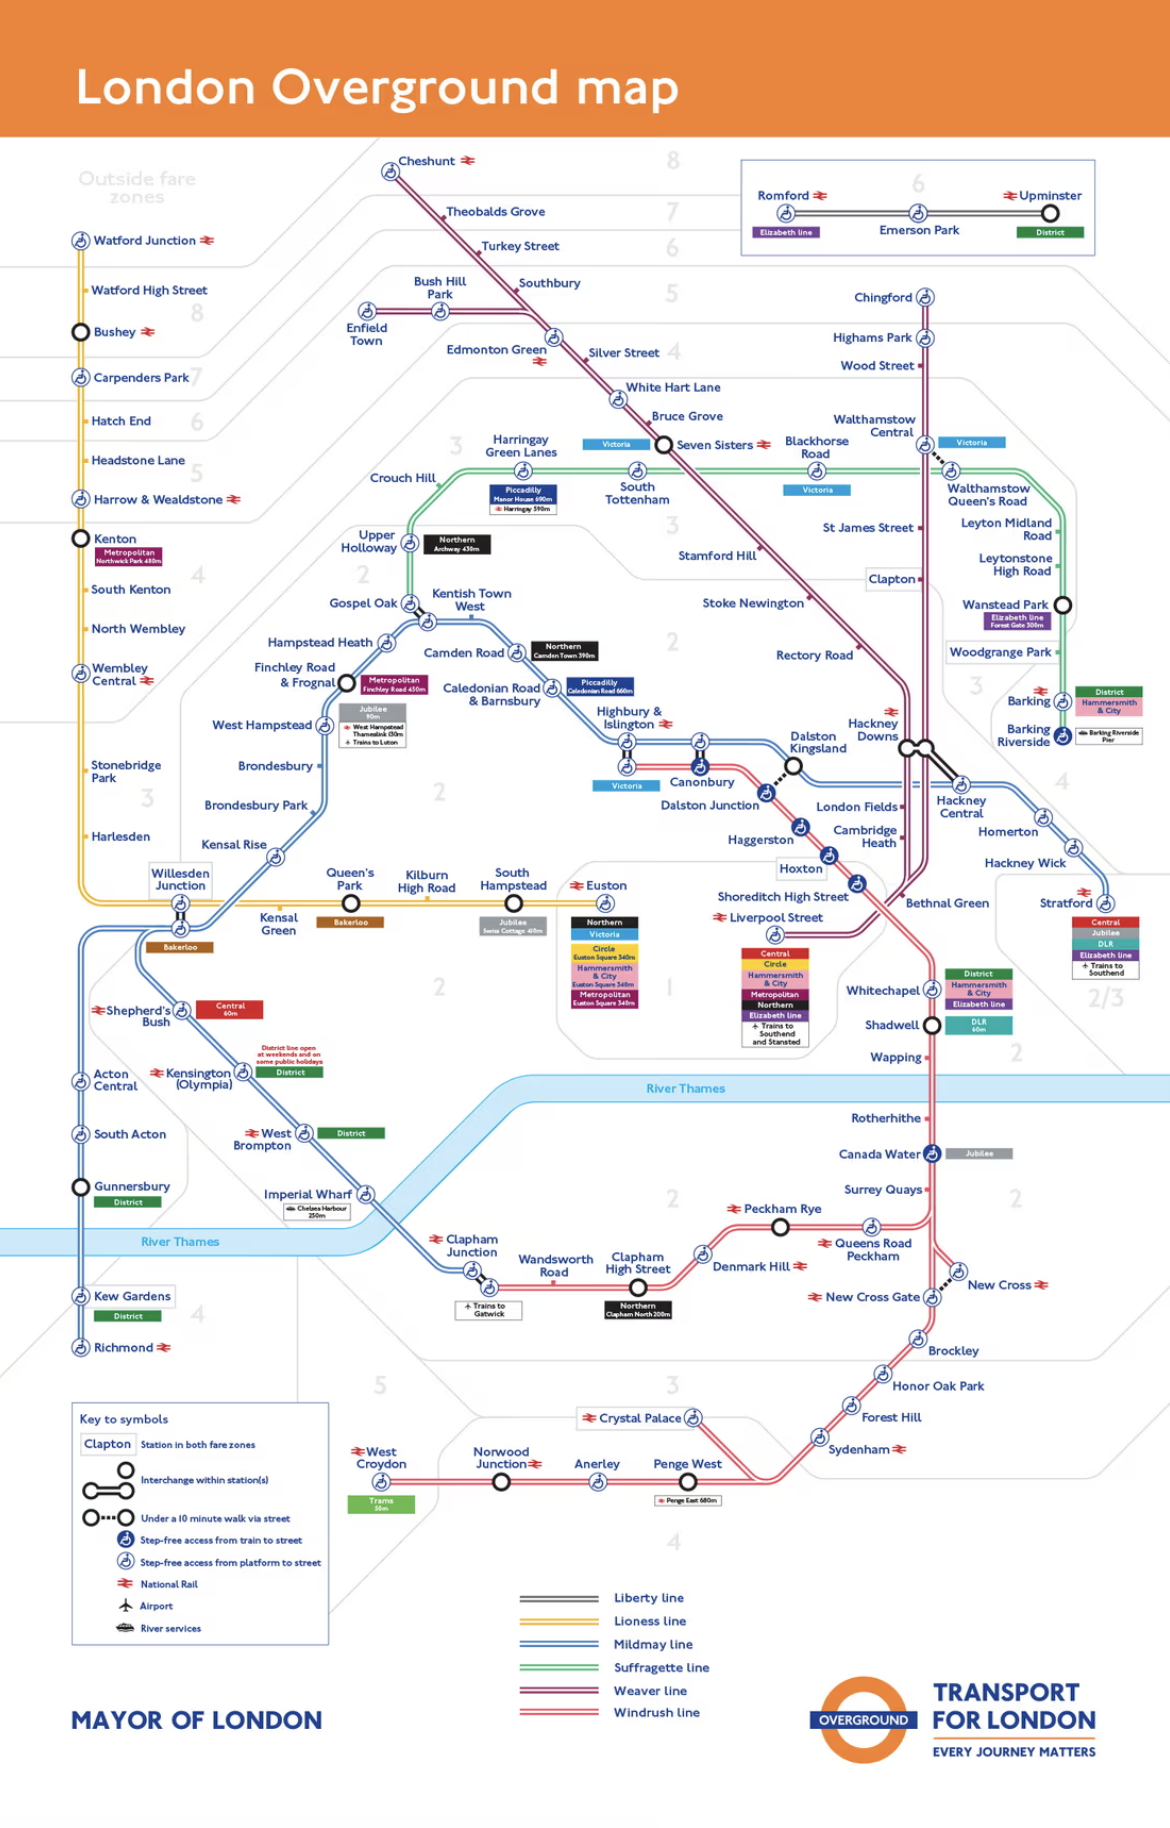 TfL map showing new London Overground lines